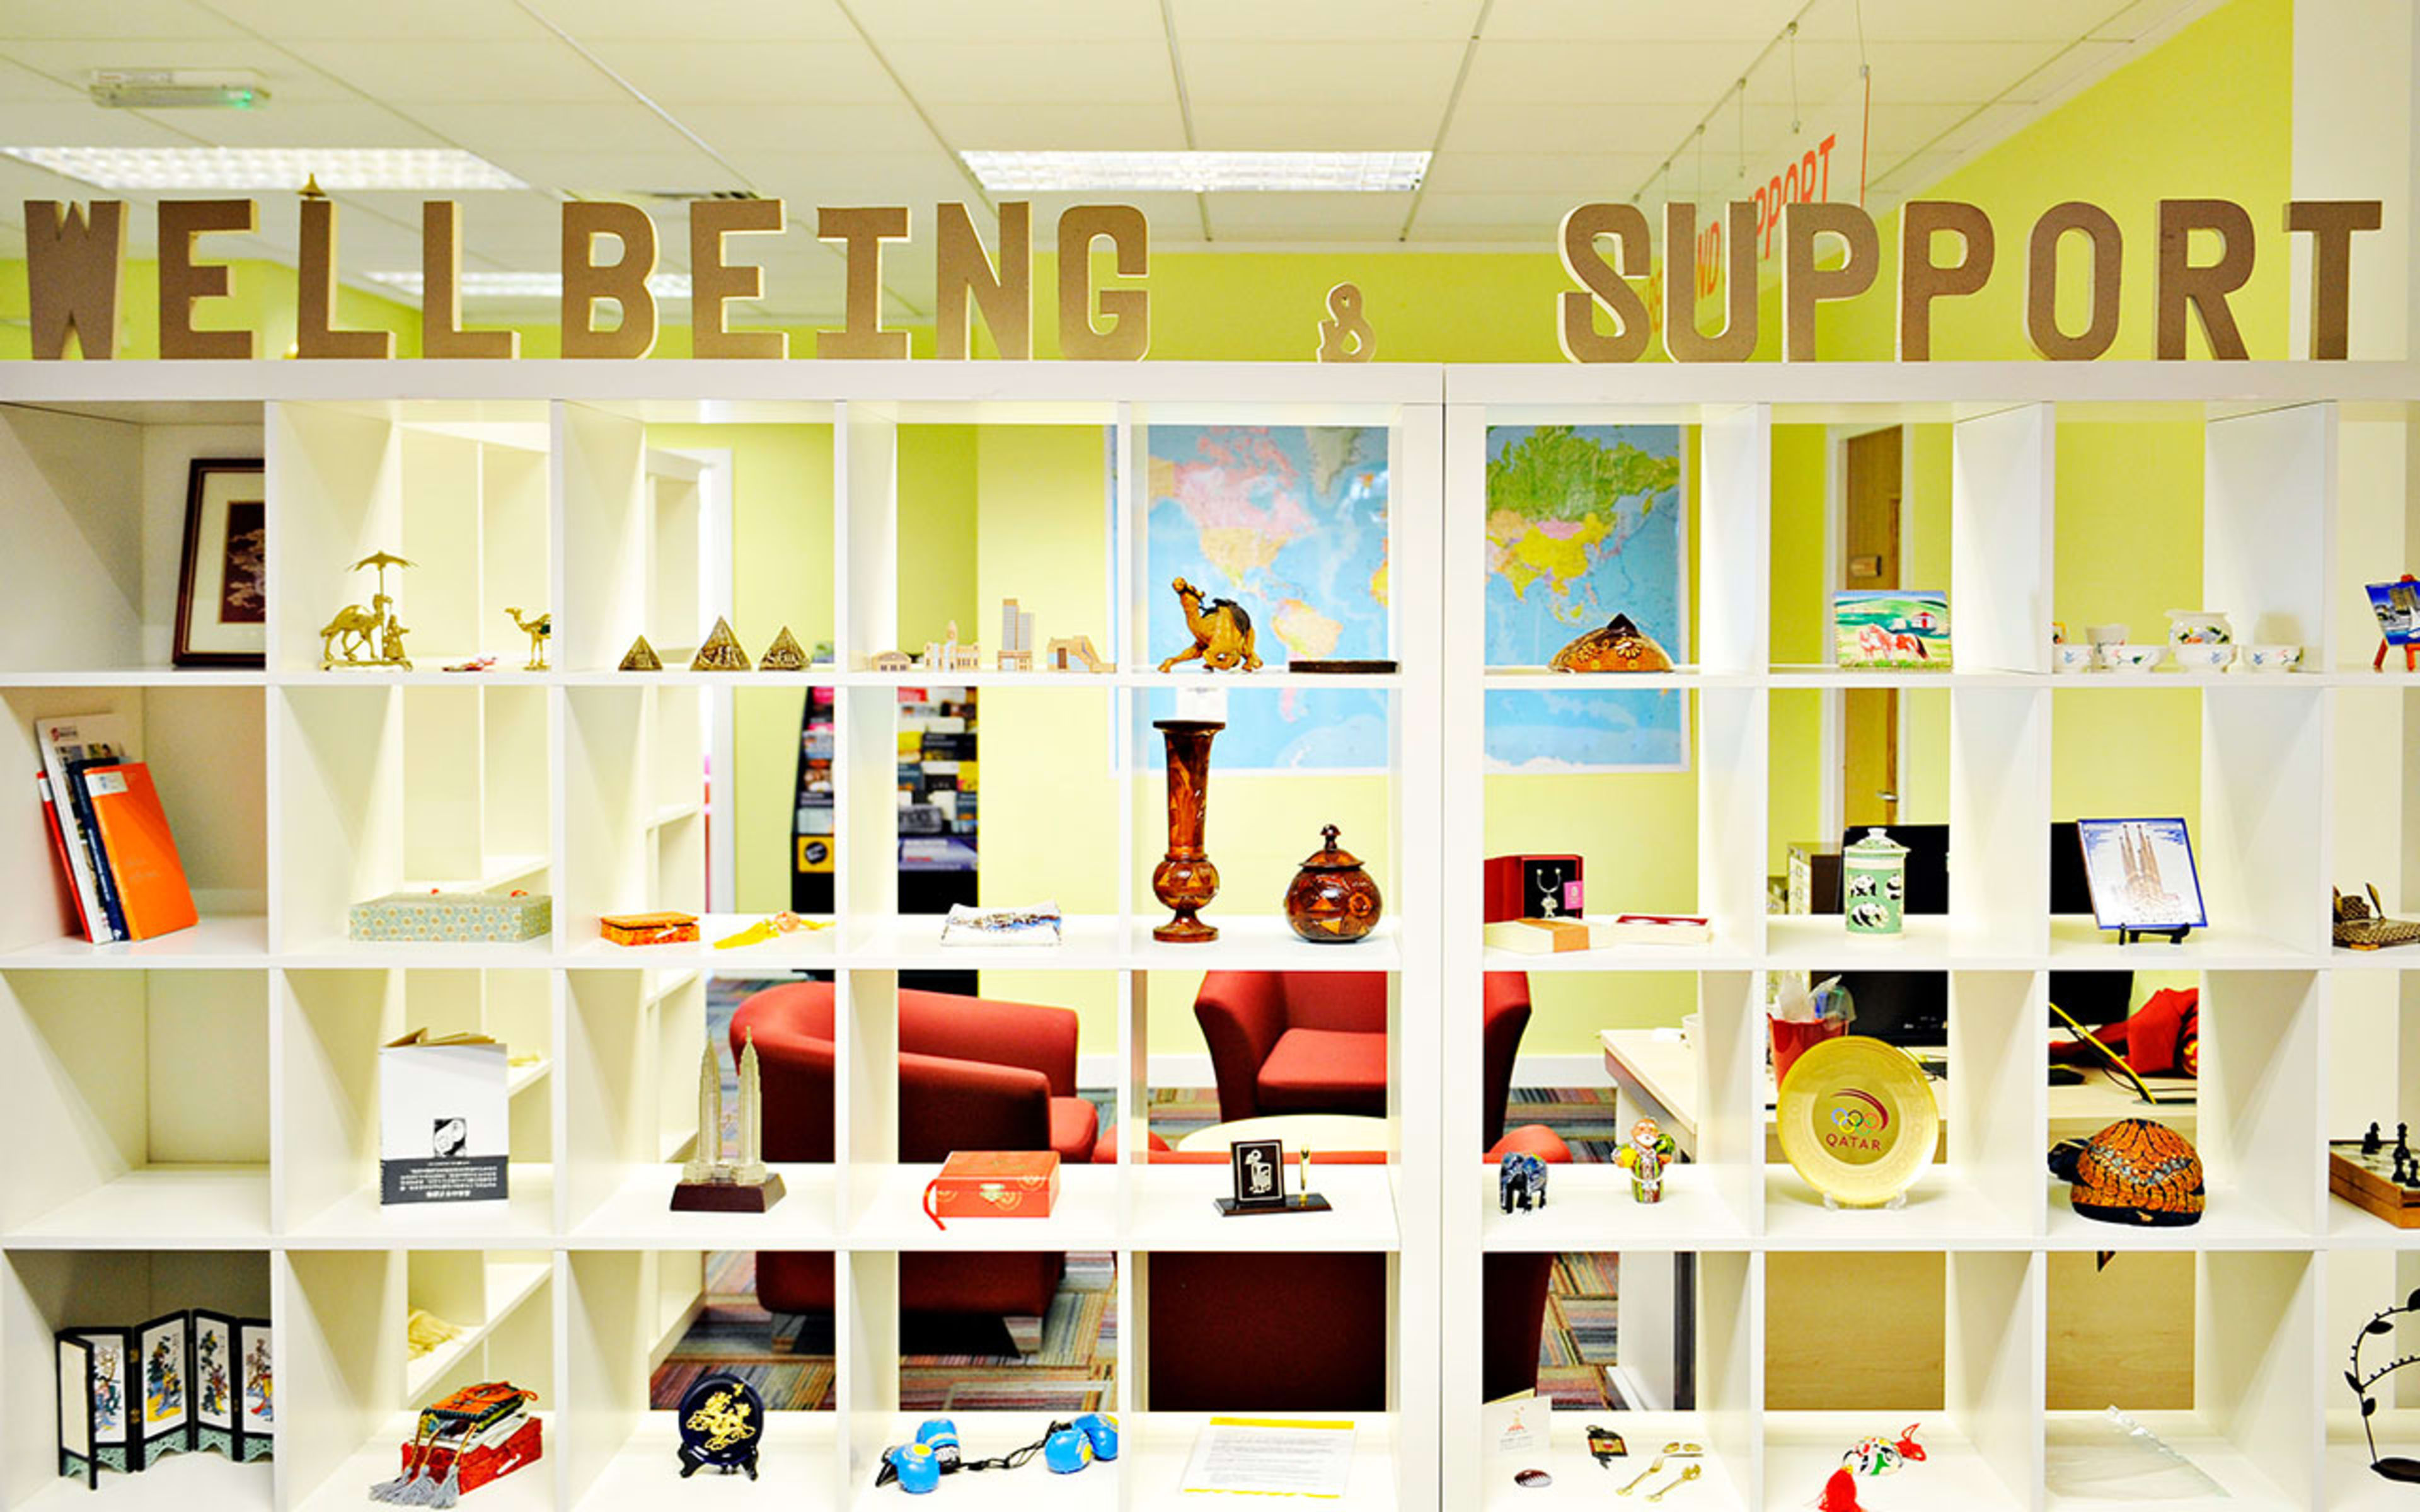 Wellbeing and Support area - Bookshelf 